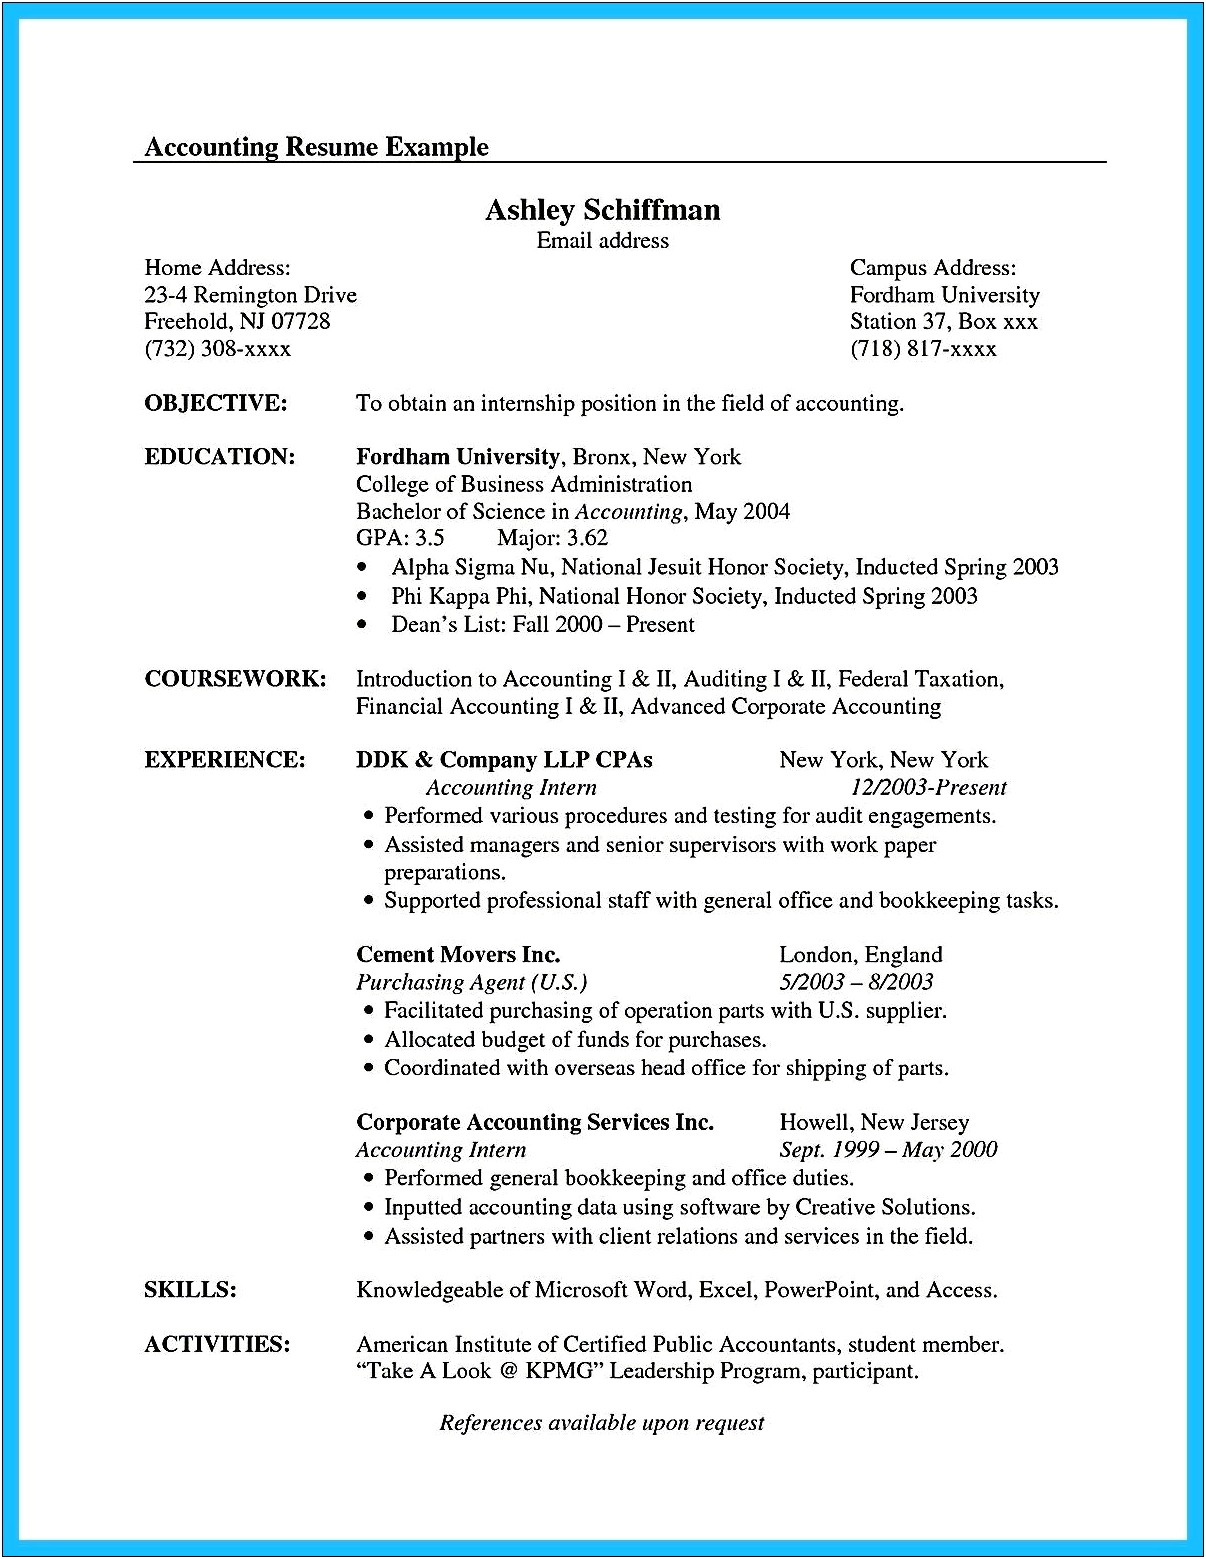 Resume For Accounting Internship With No Experience